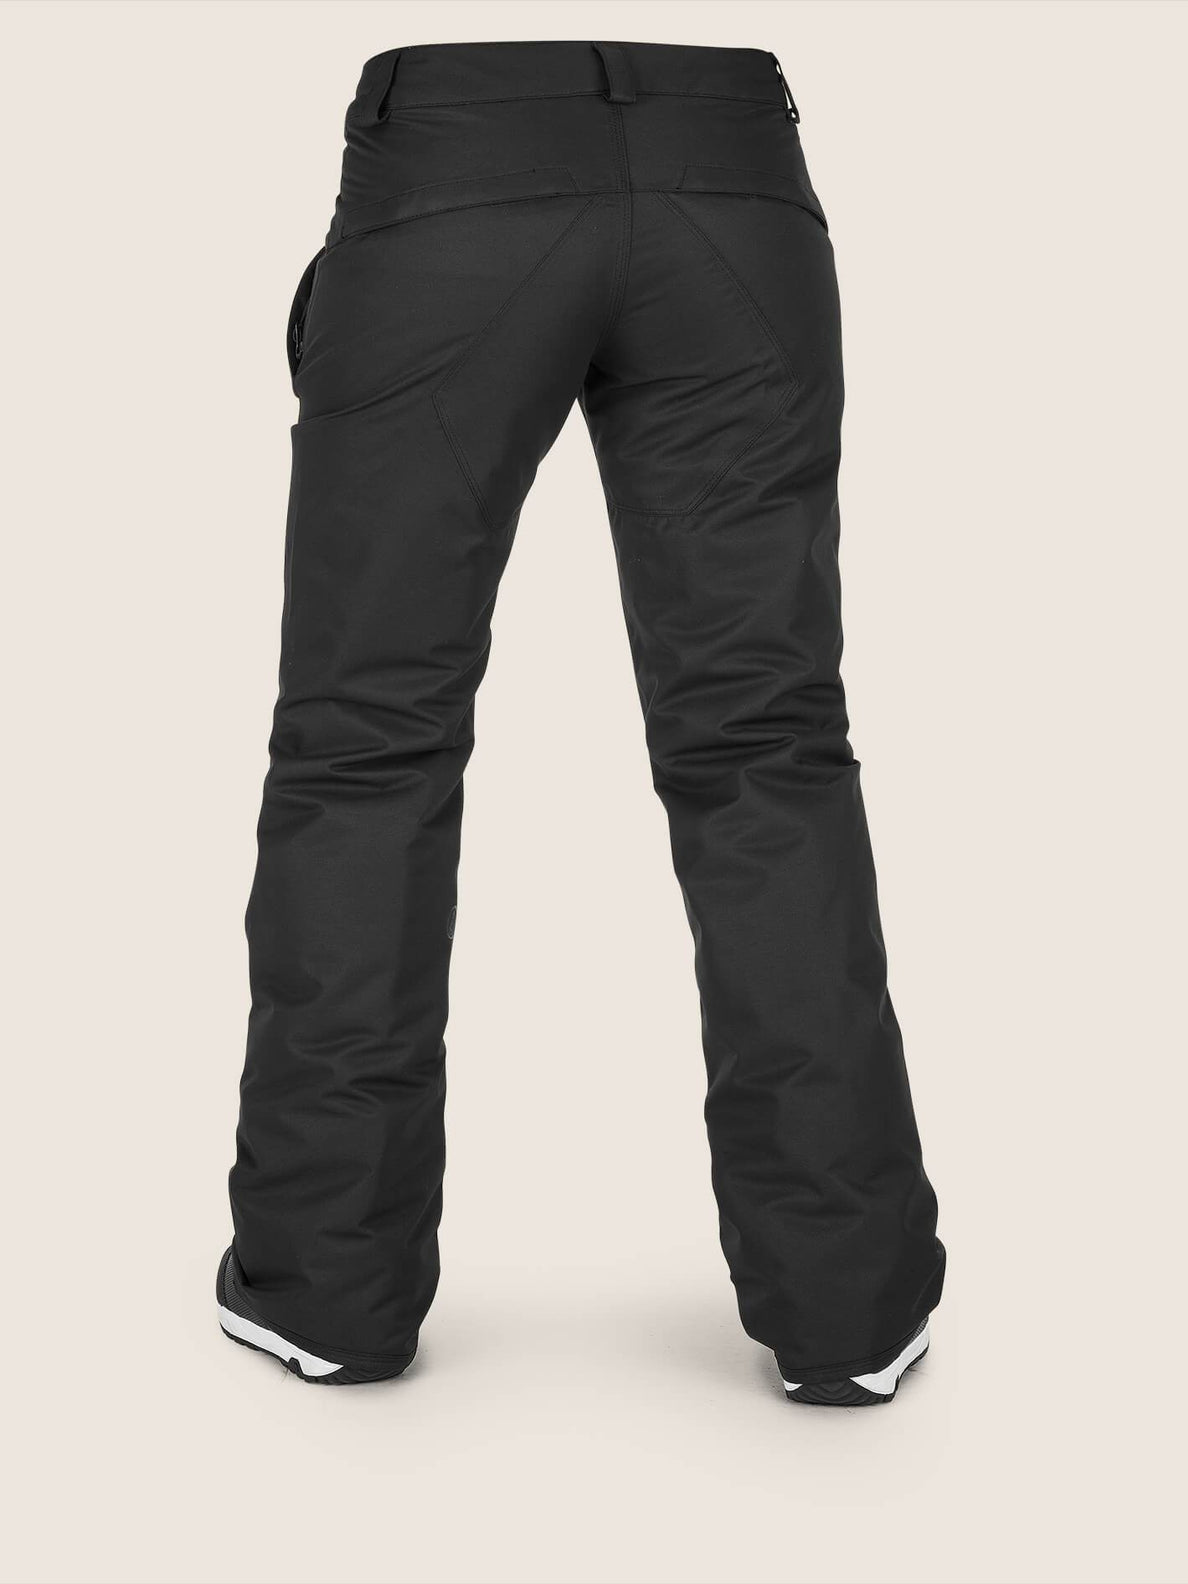 Frochickie Insulated Pants - Black